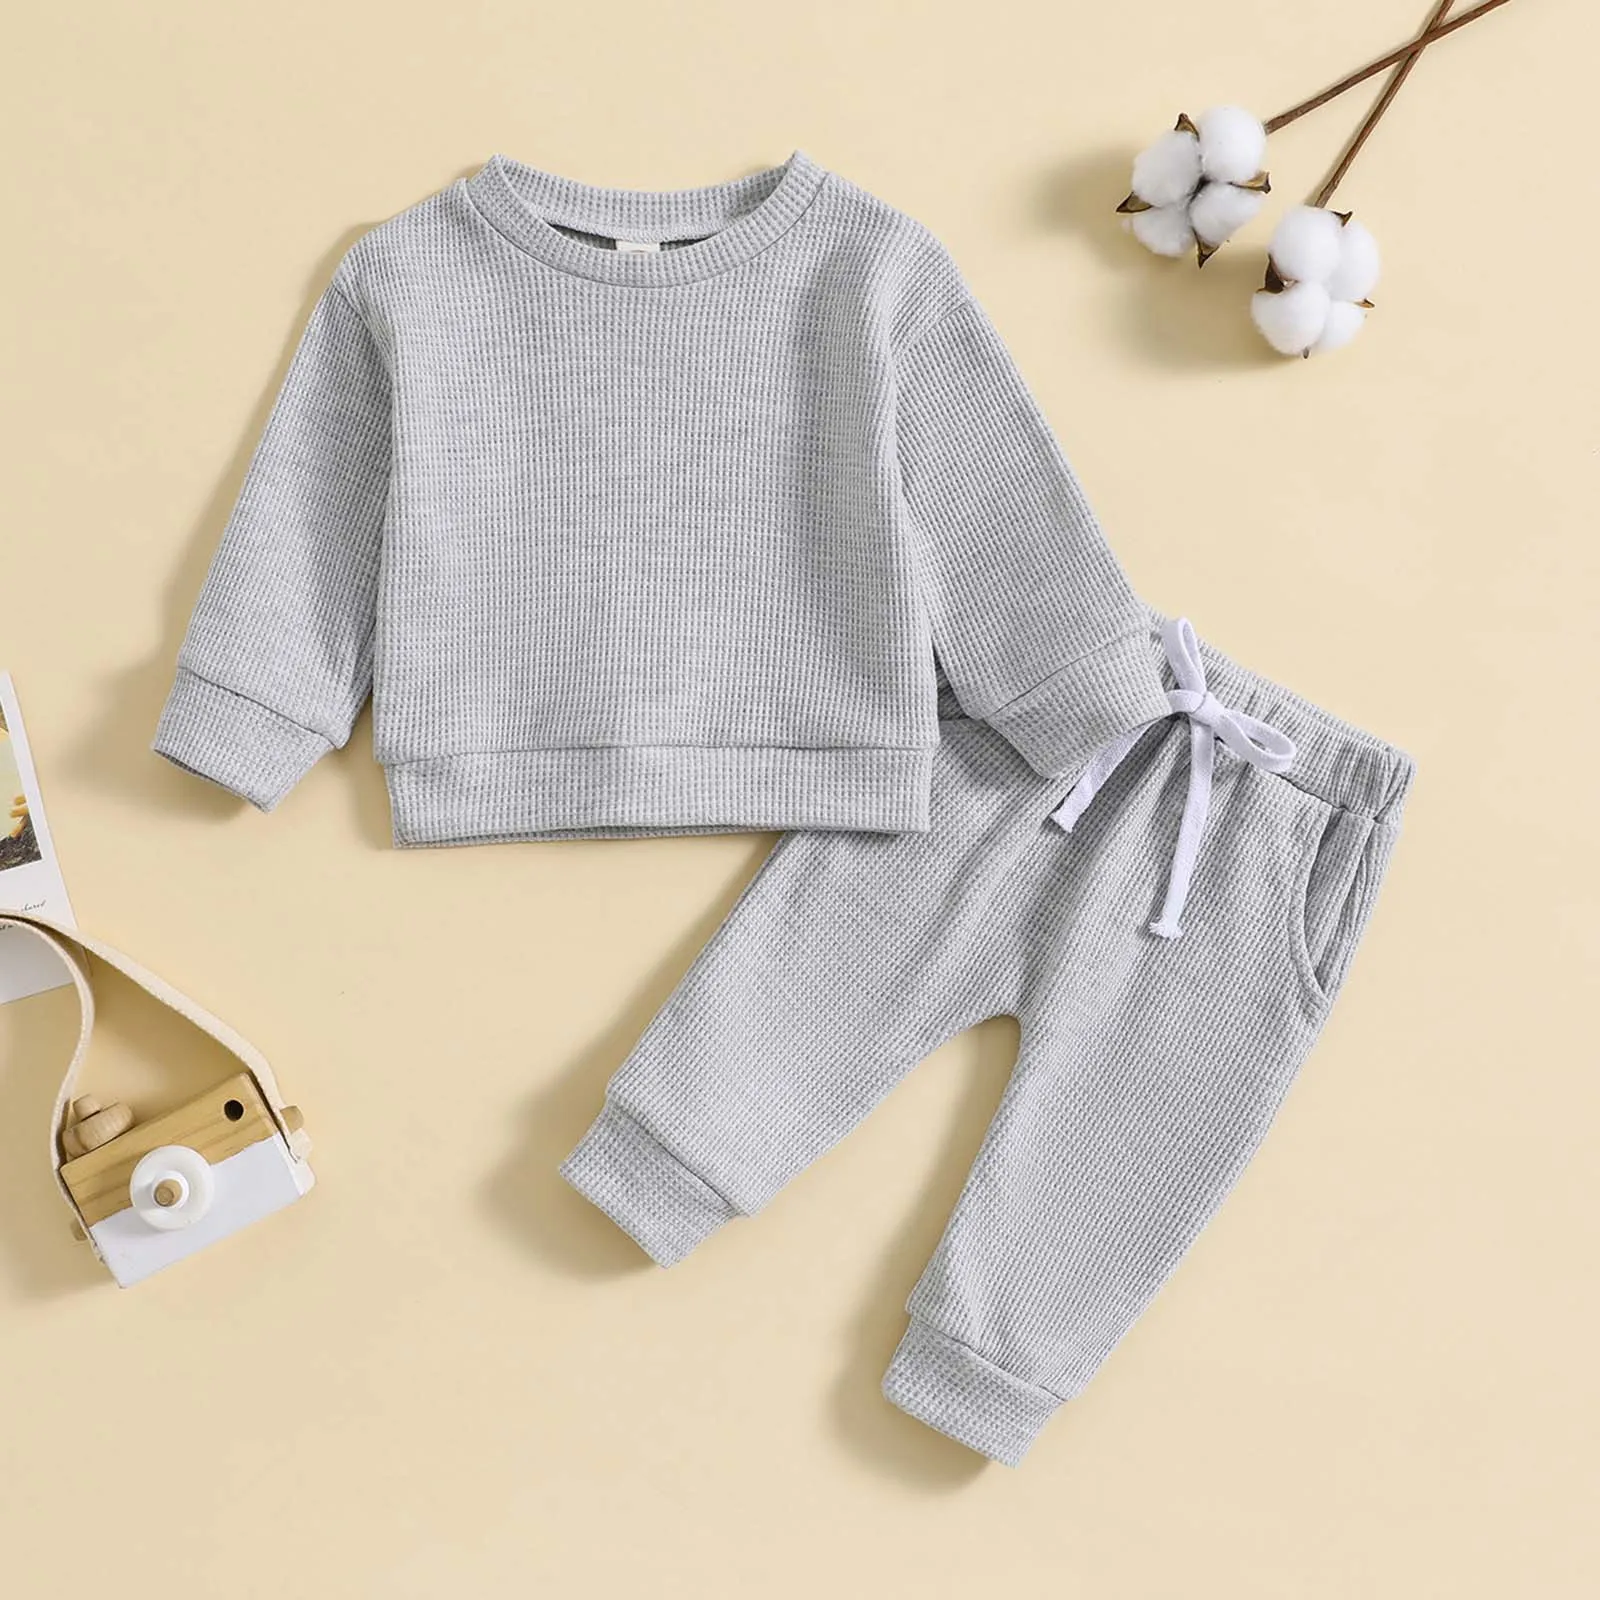 

Toddler Boys Girls Long Sleeve Solid Color Sweatshirts Pullover Tops+Pants 2PCS Outfits Baby Sweatsuits Tracksuits Baby Clothes